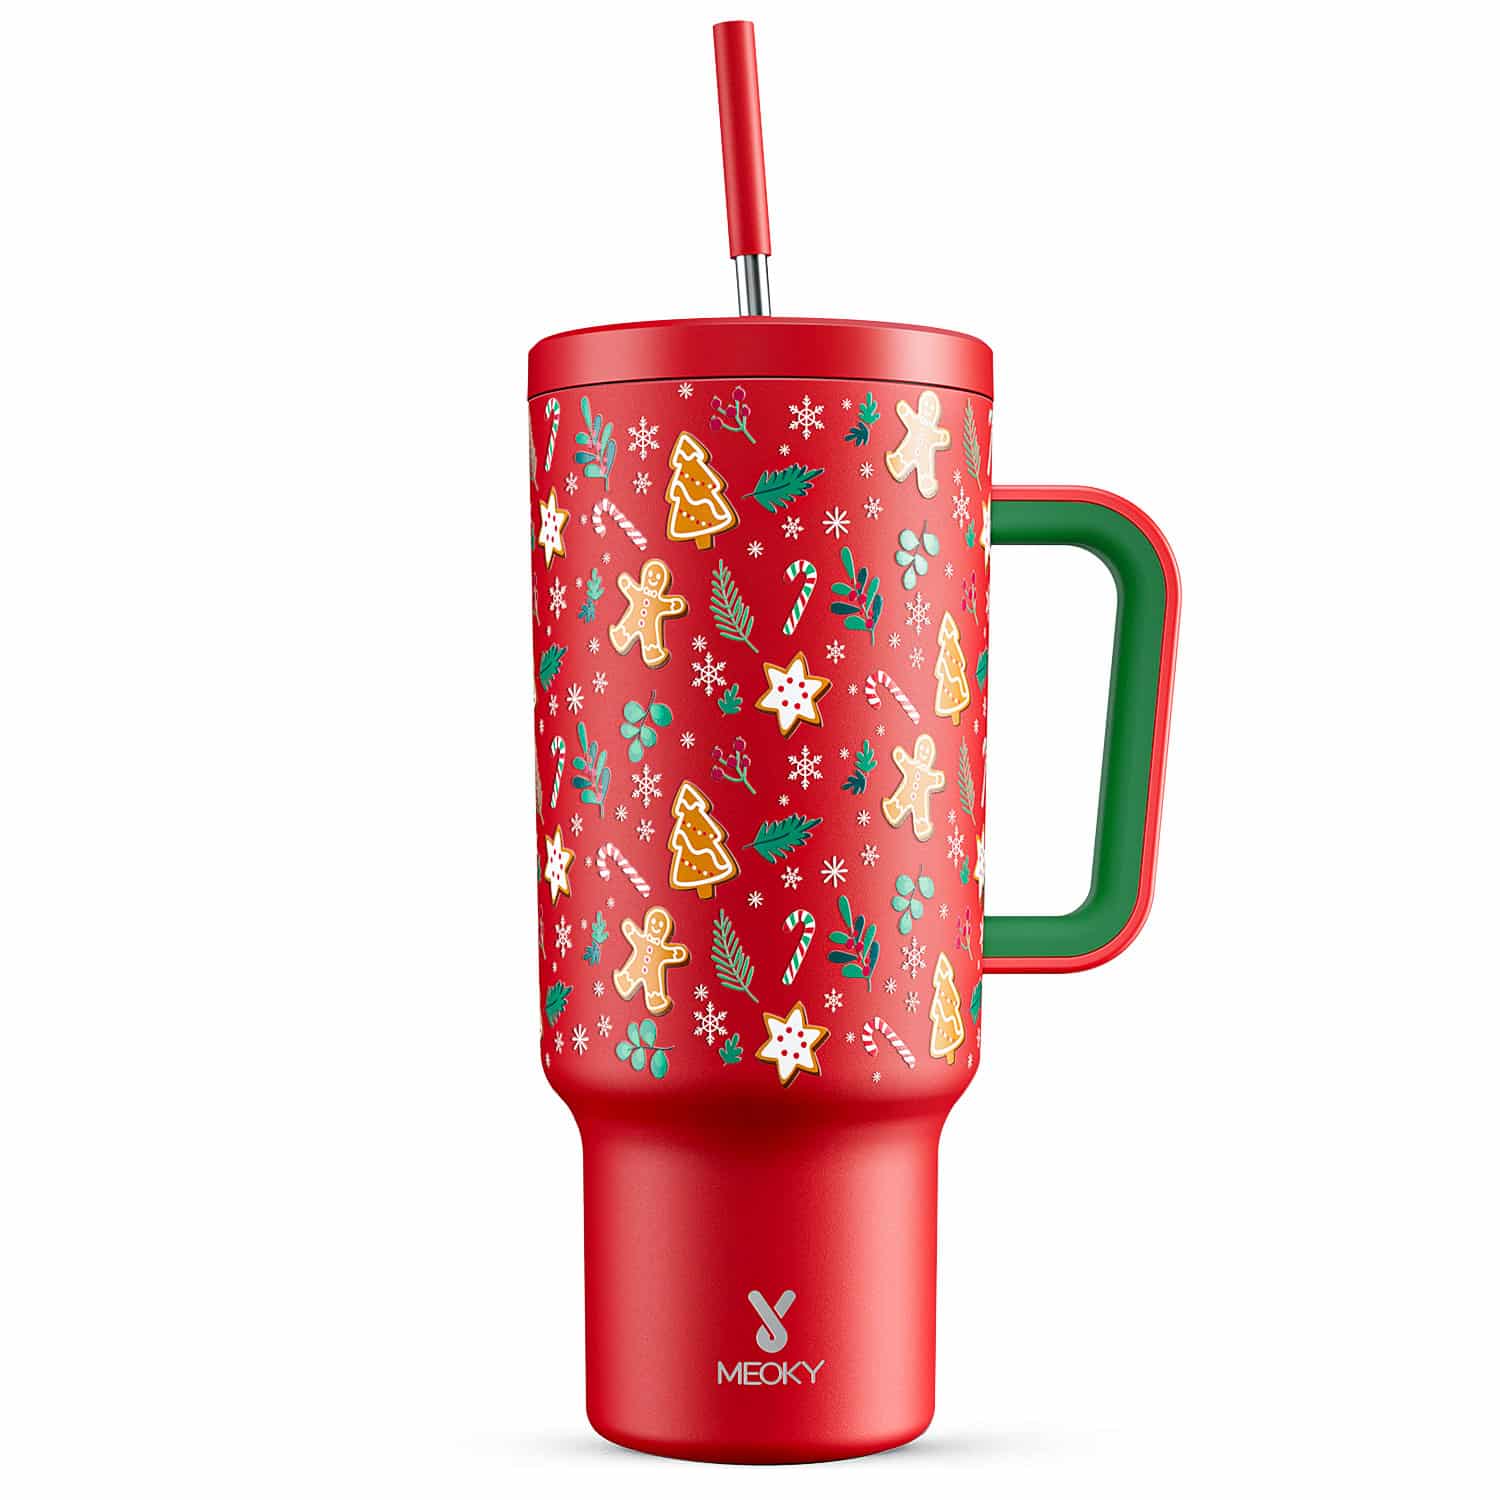 Meoky 40oz tumbler with handle and straw lid Christmas special edition-Red